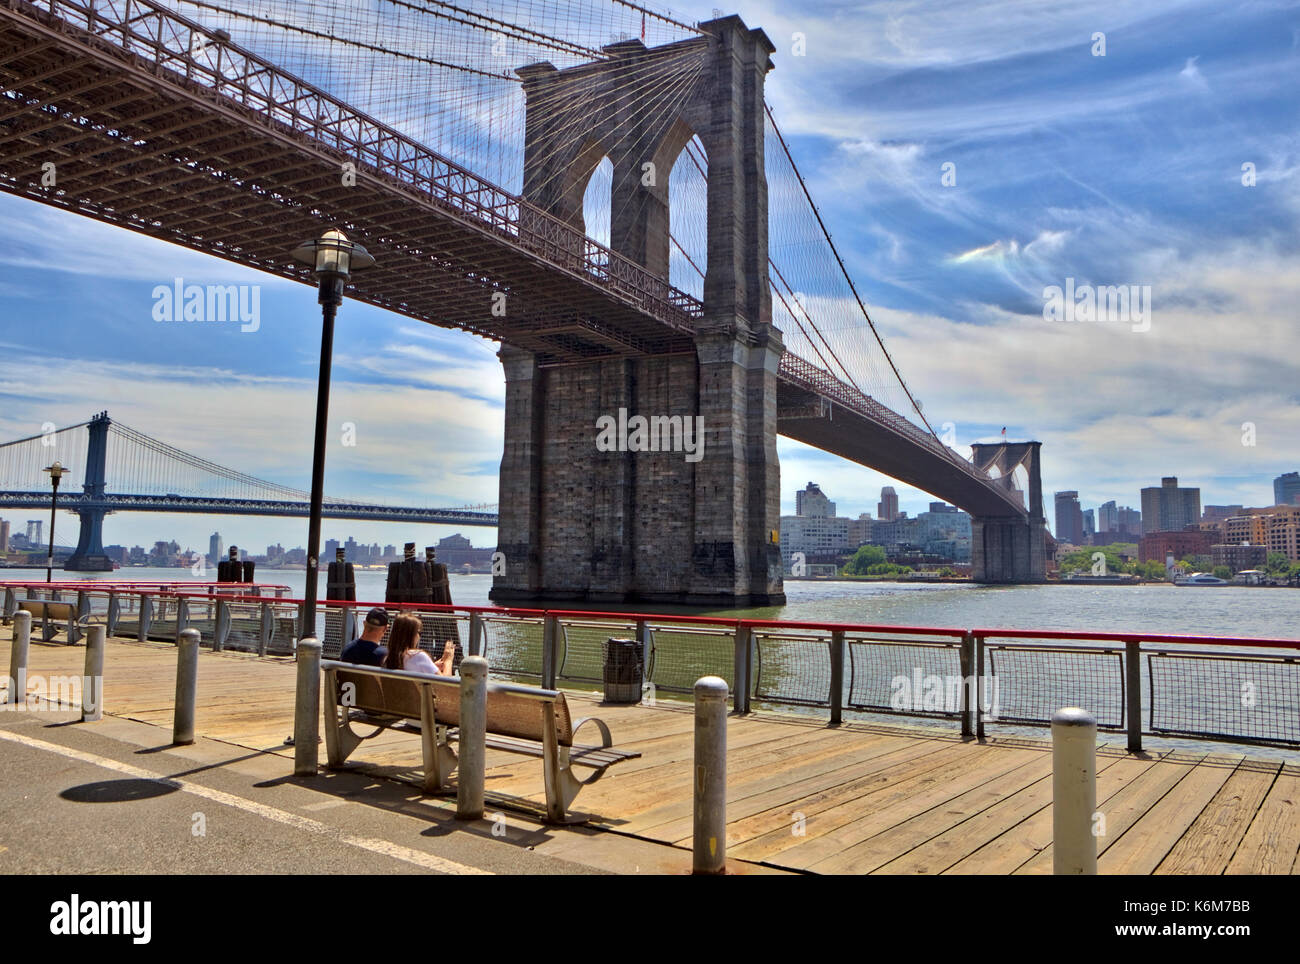 A couple sits on a park bench underneath the Brooklyn Bridge on the Manhattan side. Stock Photo